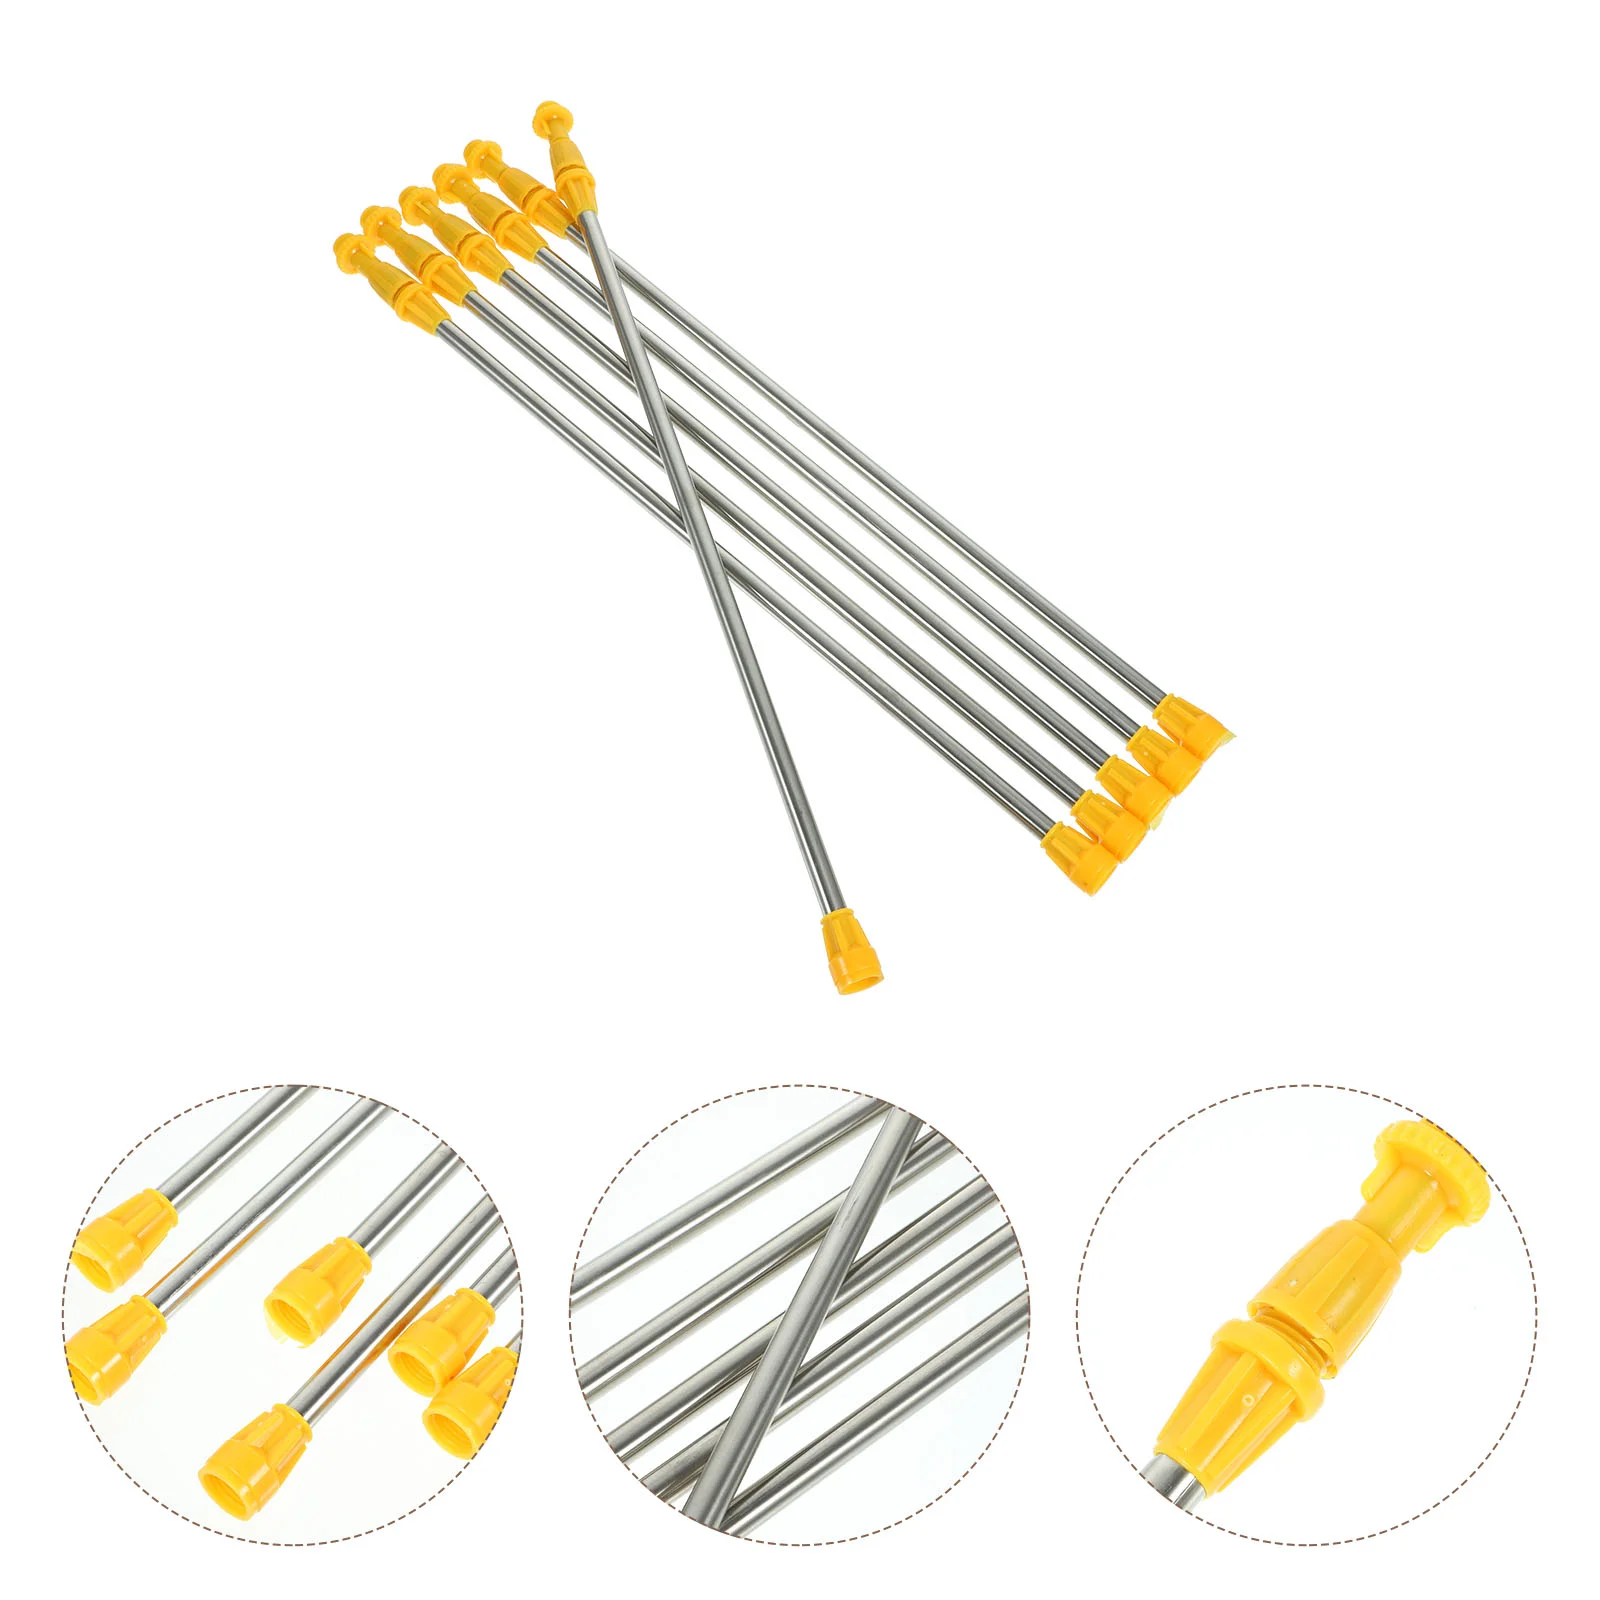 

6 Pcs Sprayer Accessories Stainless Steel Boom Extend Rod Hose Garden Fittings Plastic Wand Long Nozzle Airbrush